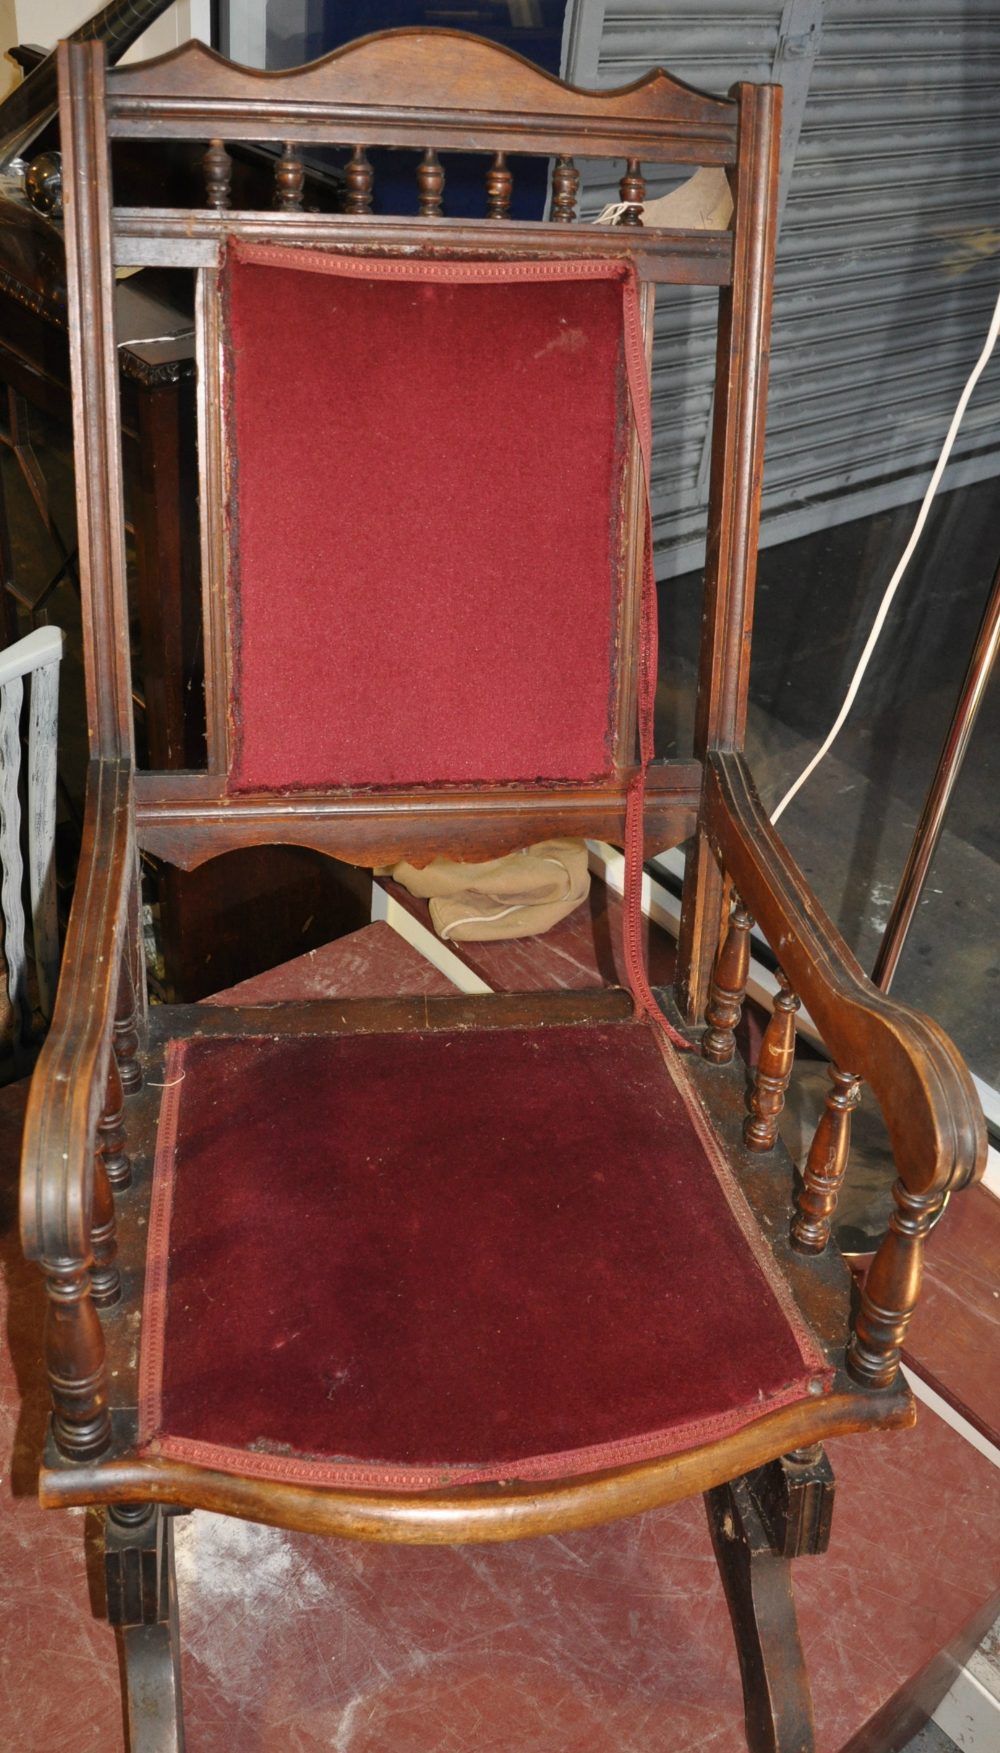 An early 20th Century American upholstered rocking chair